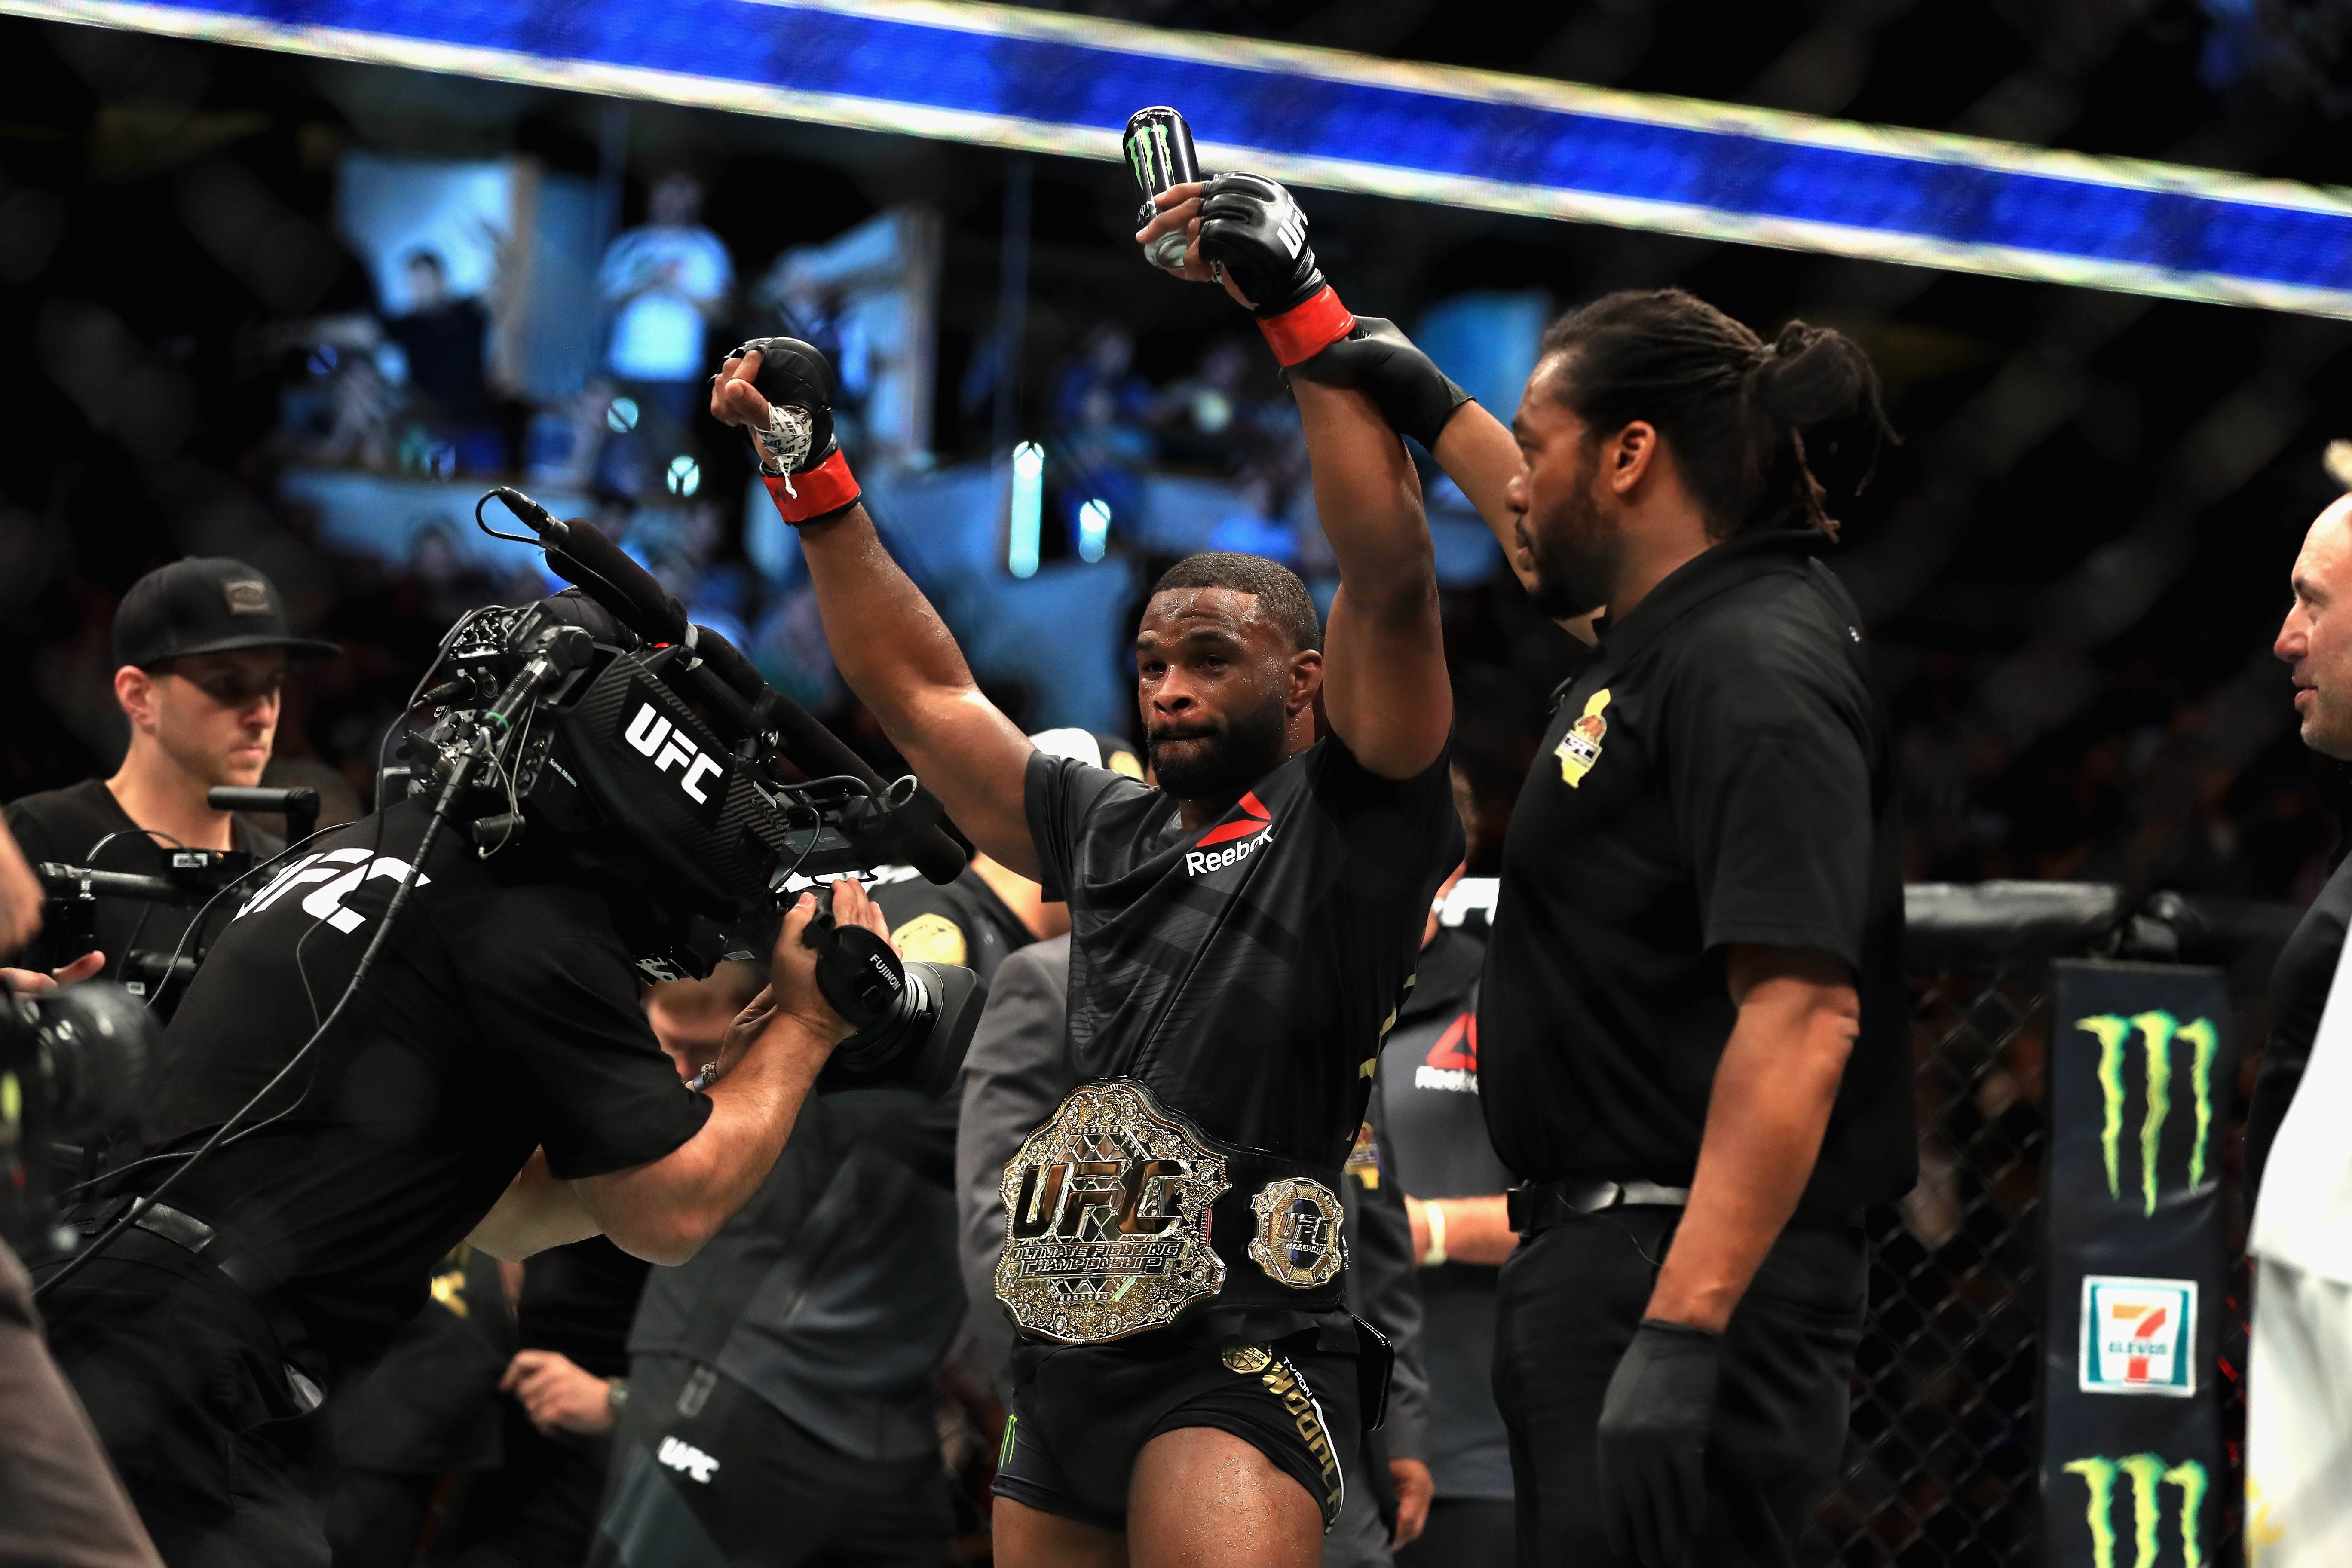 Tyron Woodley celebrates after defeating Demian Maia in a welterweight title defence at UFC 214 in 2017. Photo: AFP